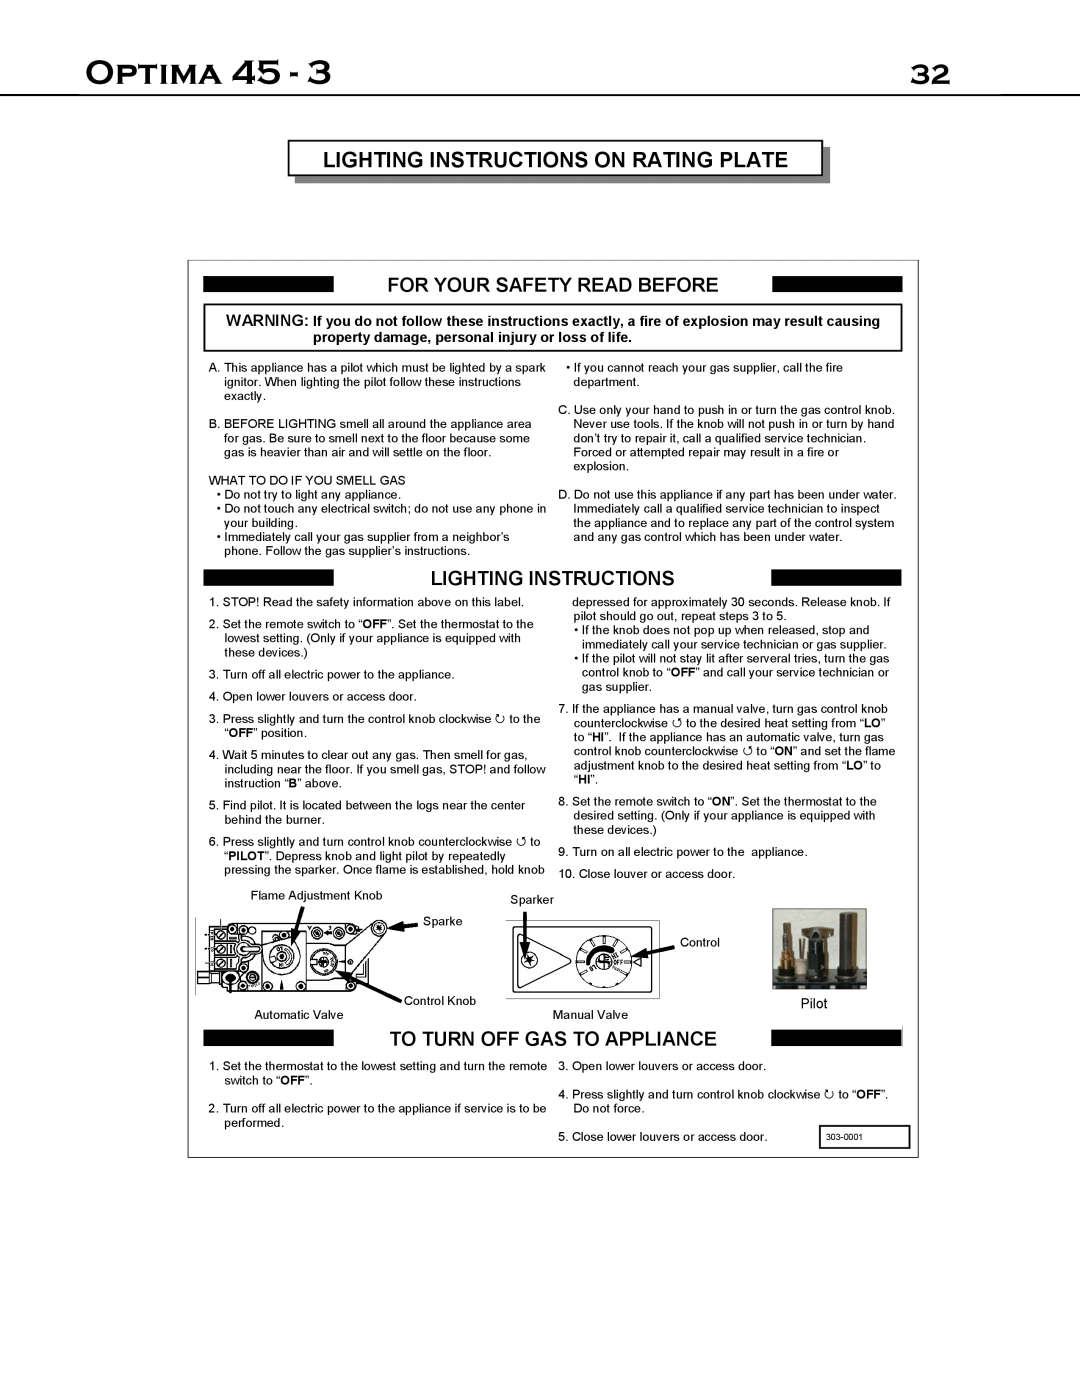 Optima Company 45 - 3 manual Lighting Instructions On Rating Plate, Optima, To Turn Off Gas To Appliance 